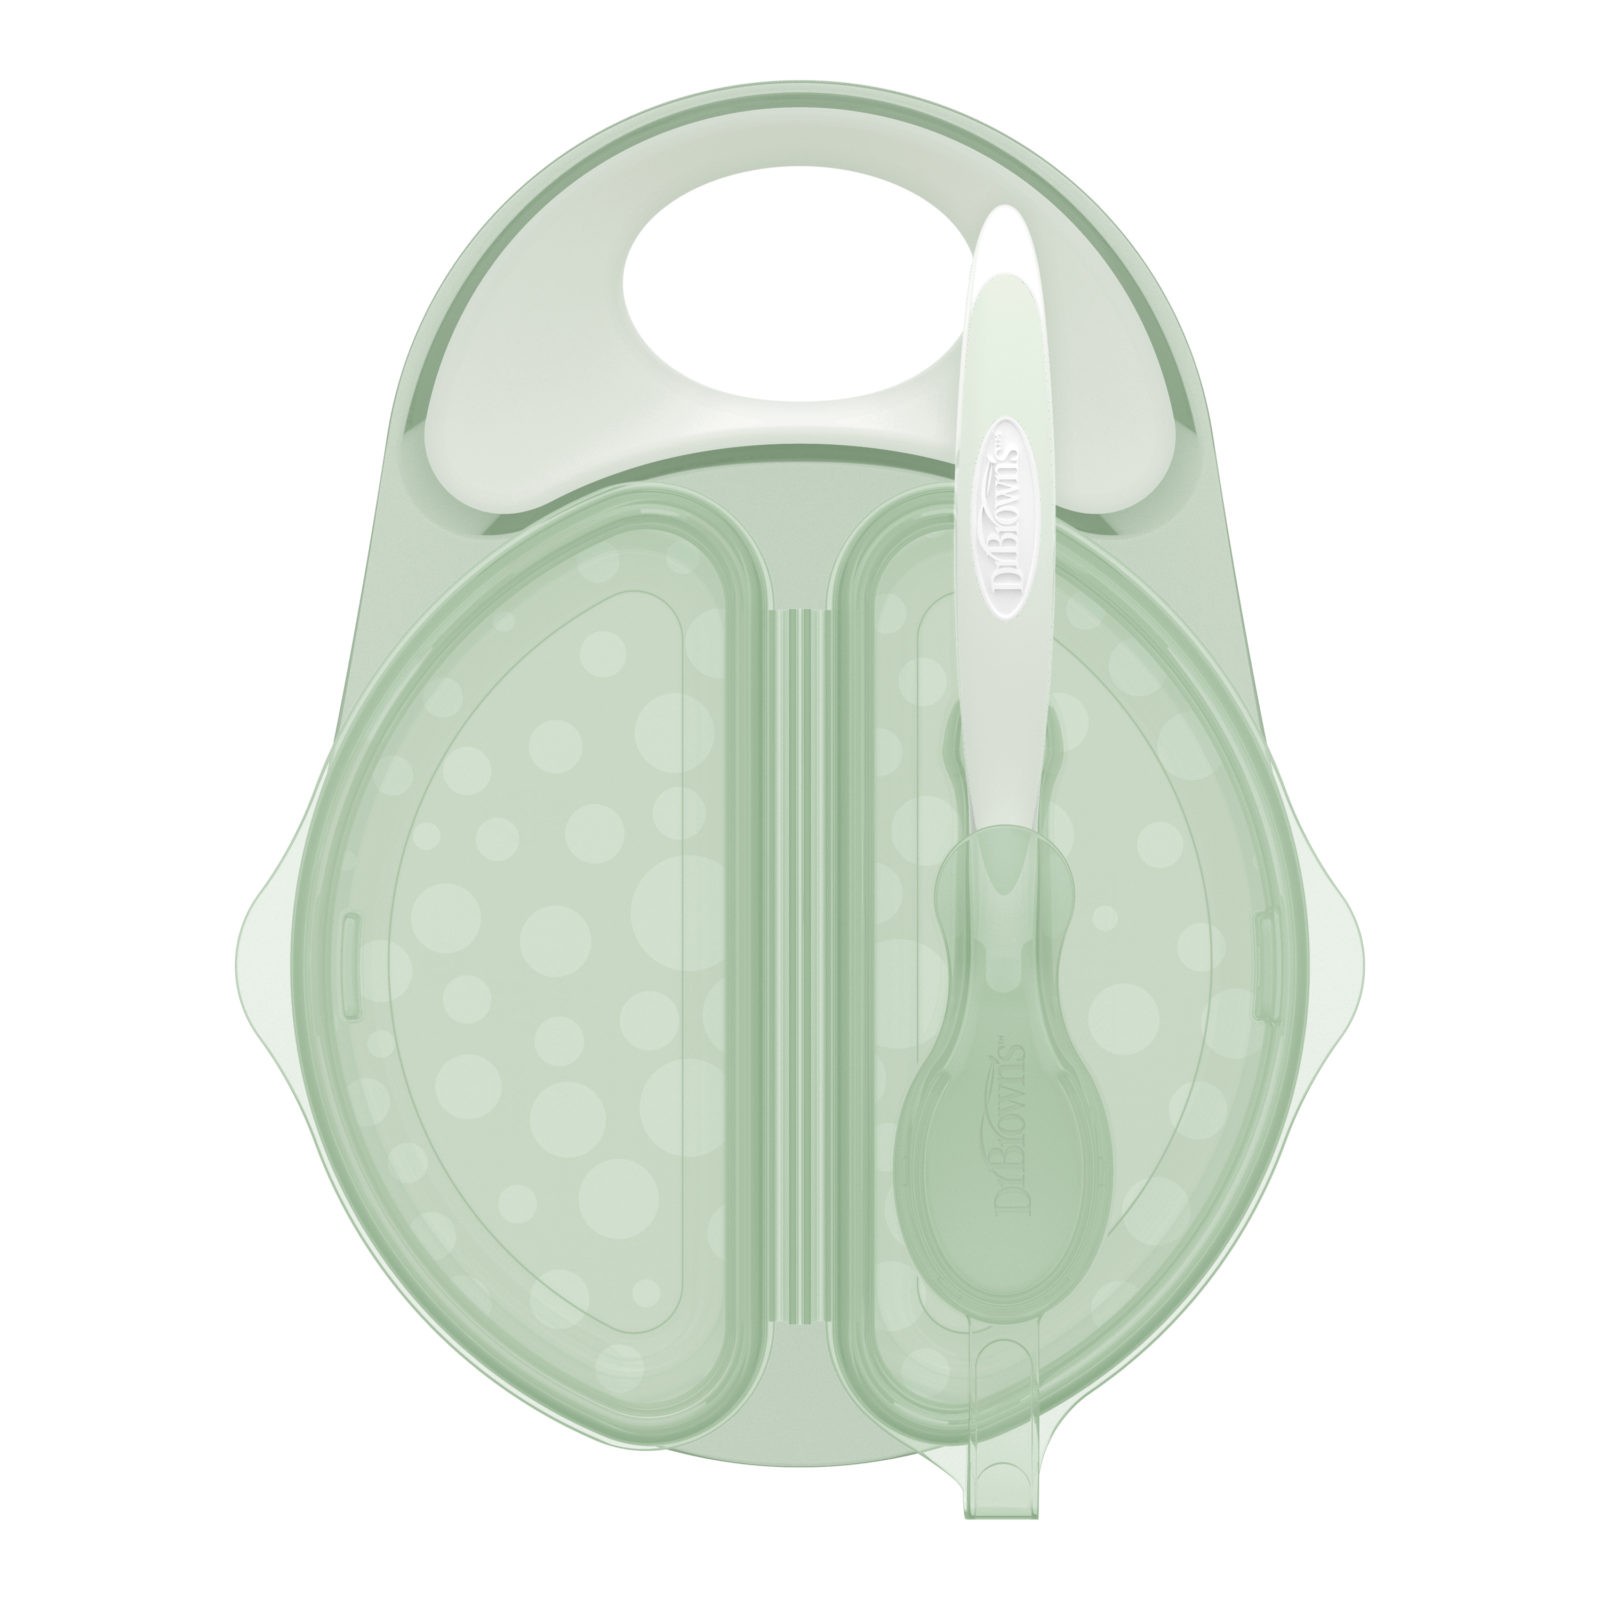 https://www.drbrownsbaby.com/wp-content/uploads/2019/12/TF010-P3_R1_Product_Top_Bowl_and_Spoon_Set_Light-Green.jpg